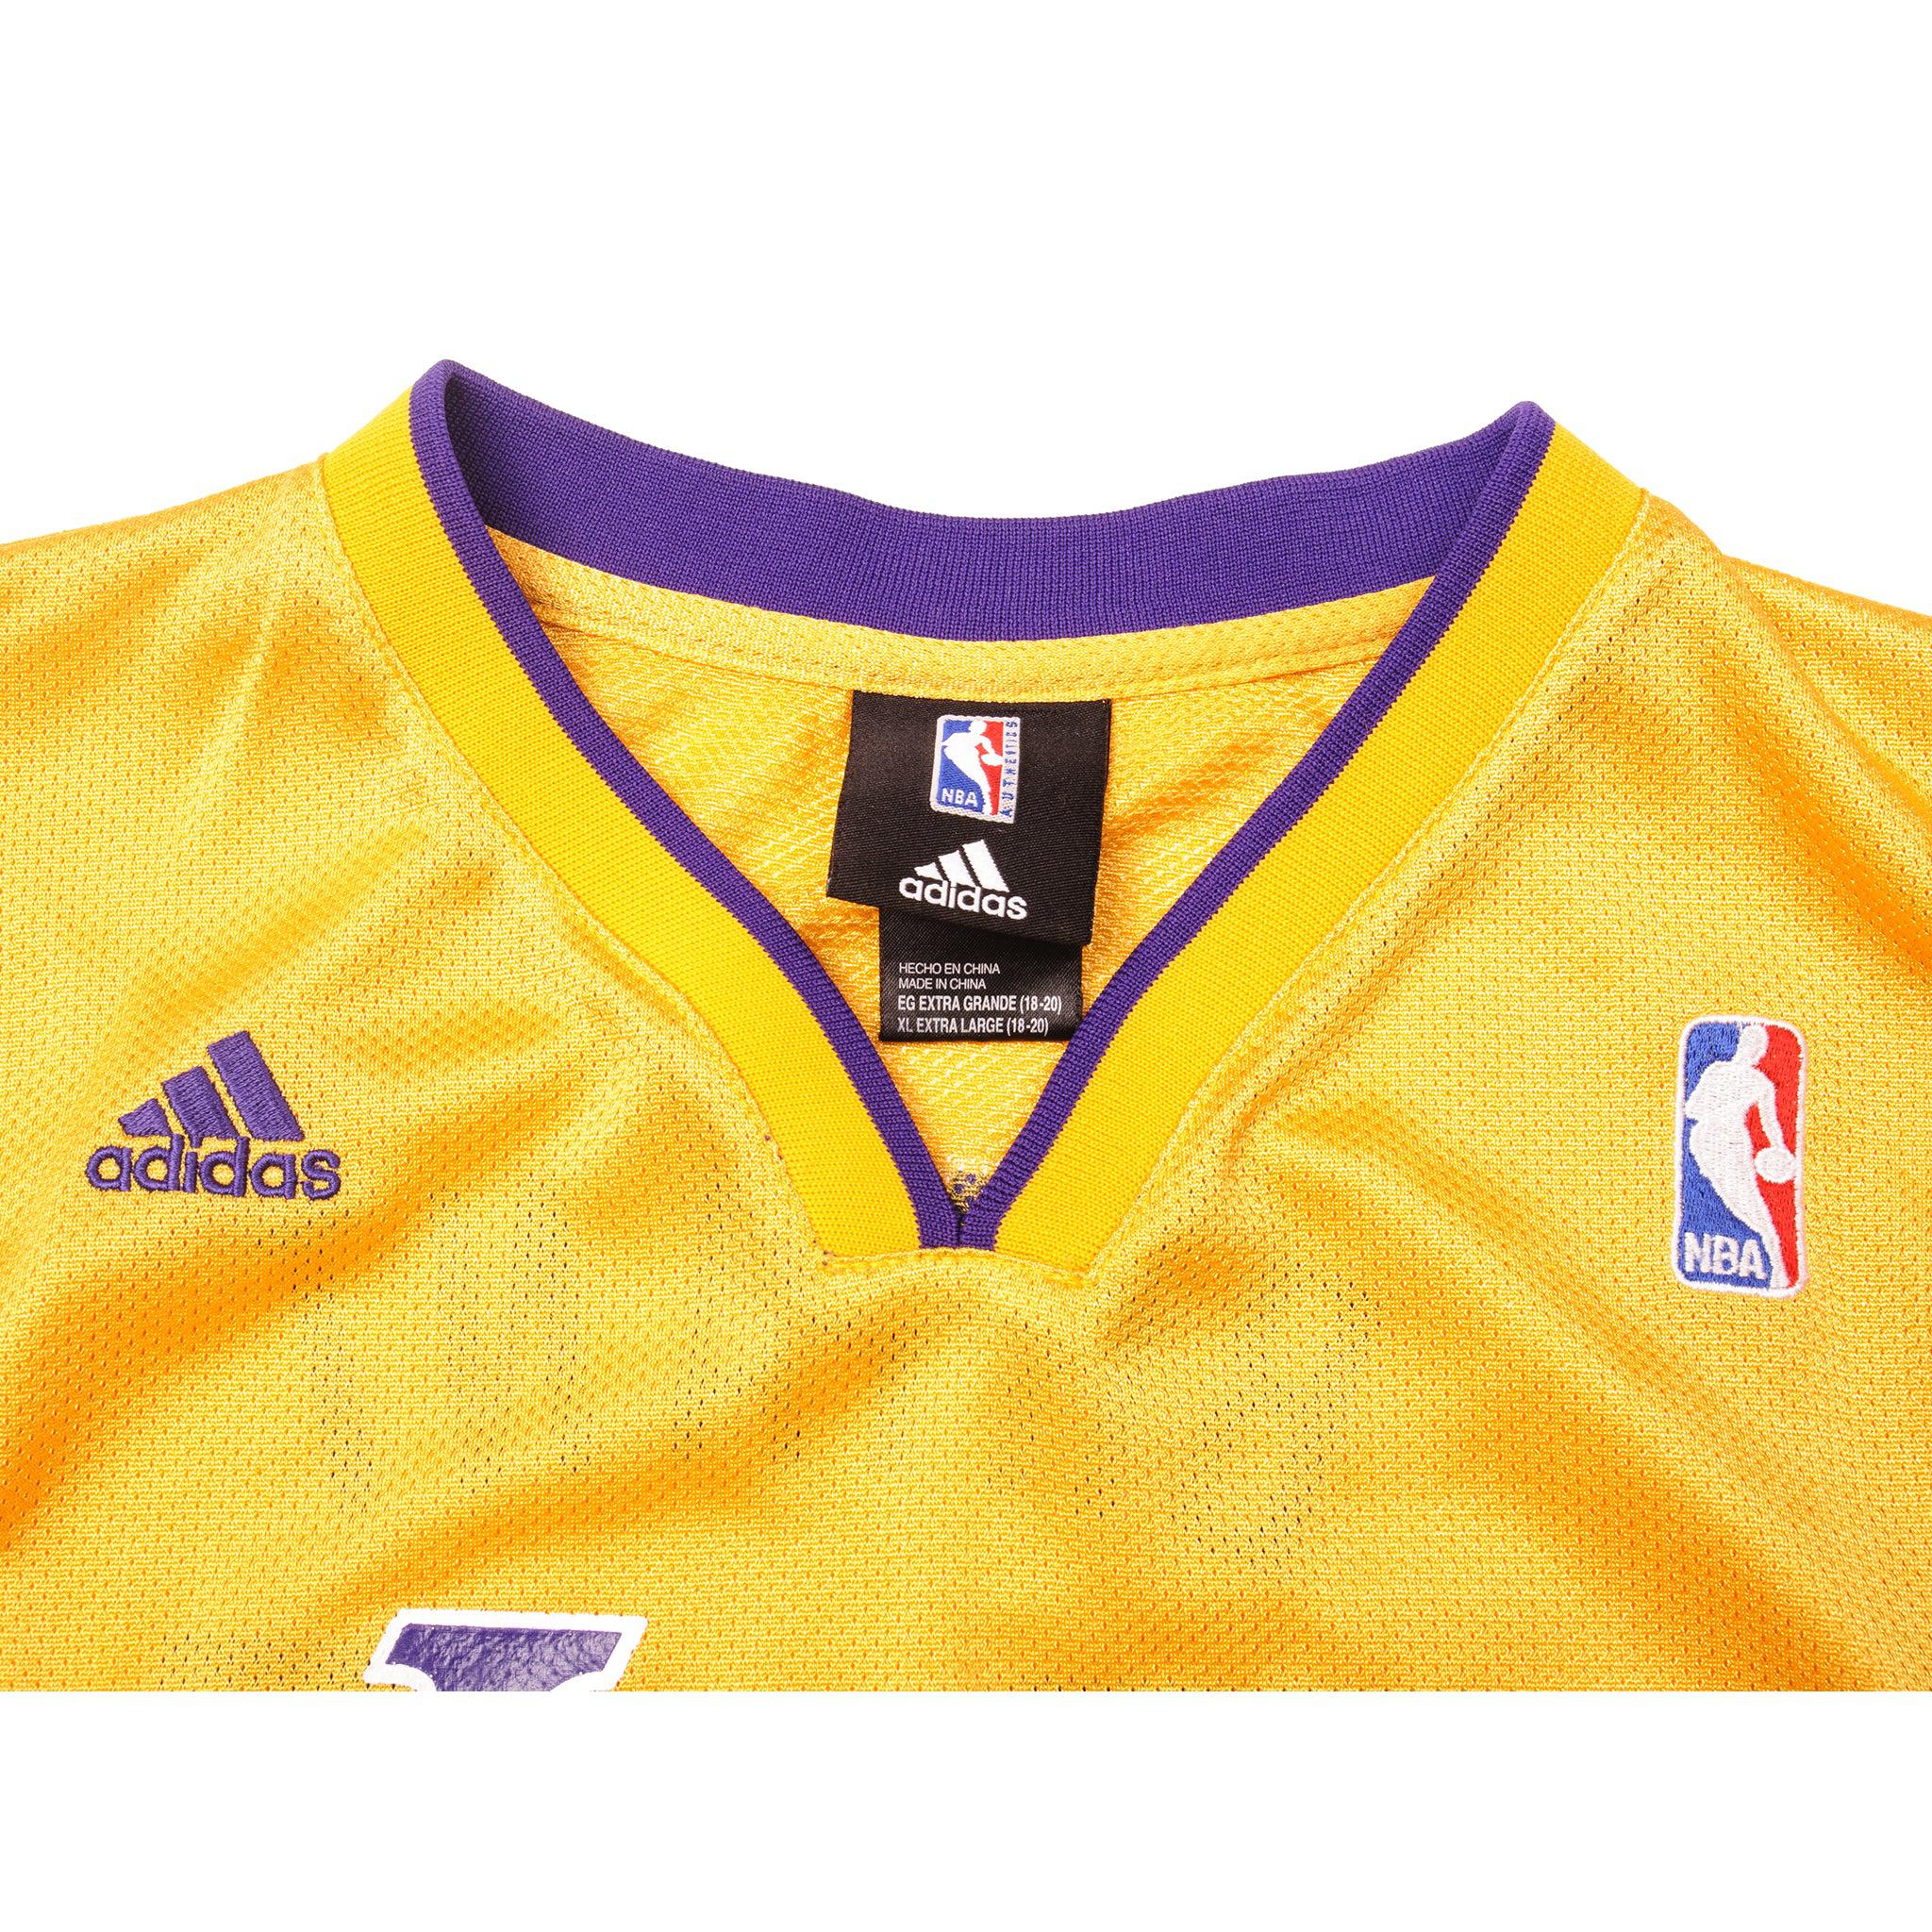 Los Angeles Lakers NBA Basketball Adidas Jersey Size S #24 Bryant